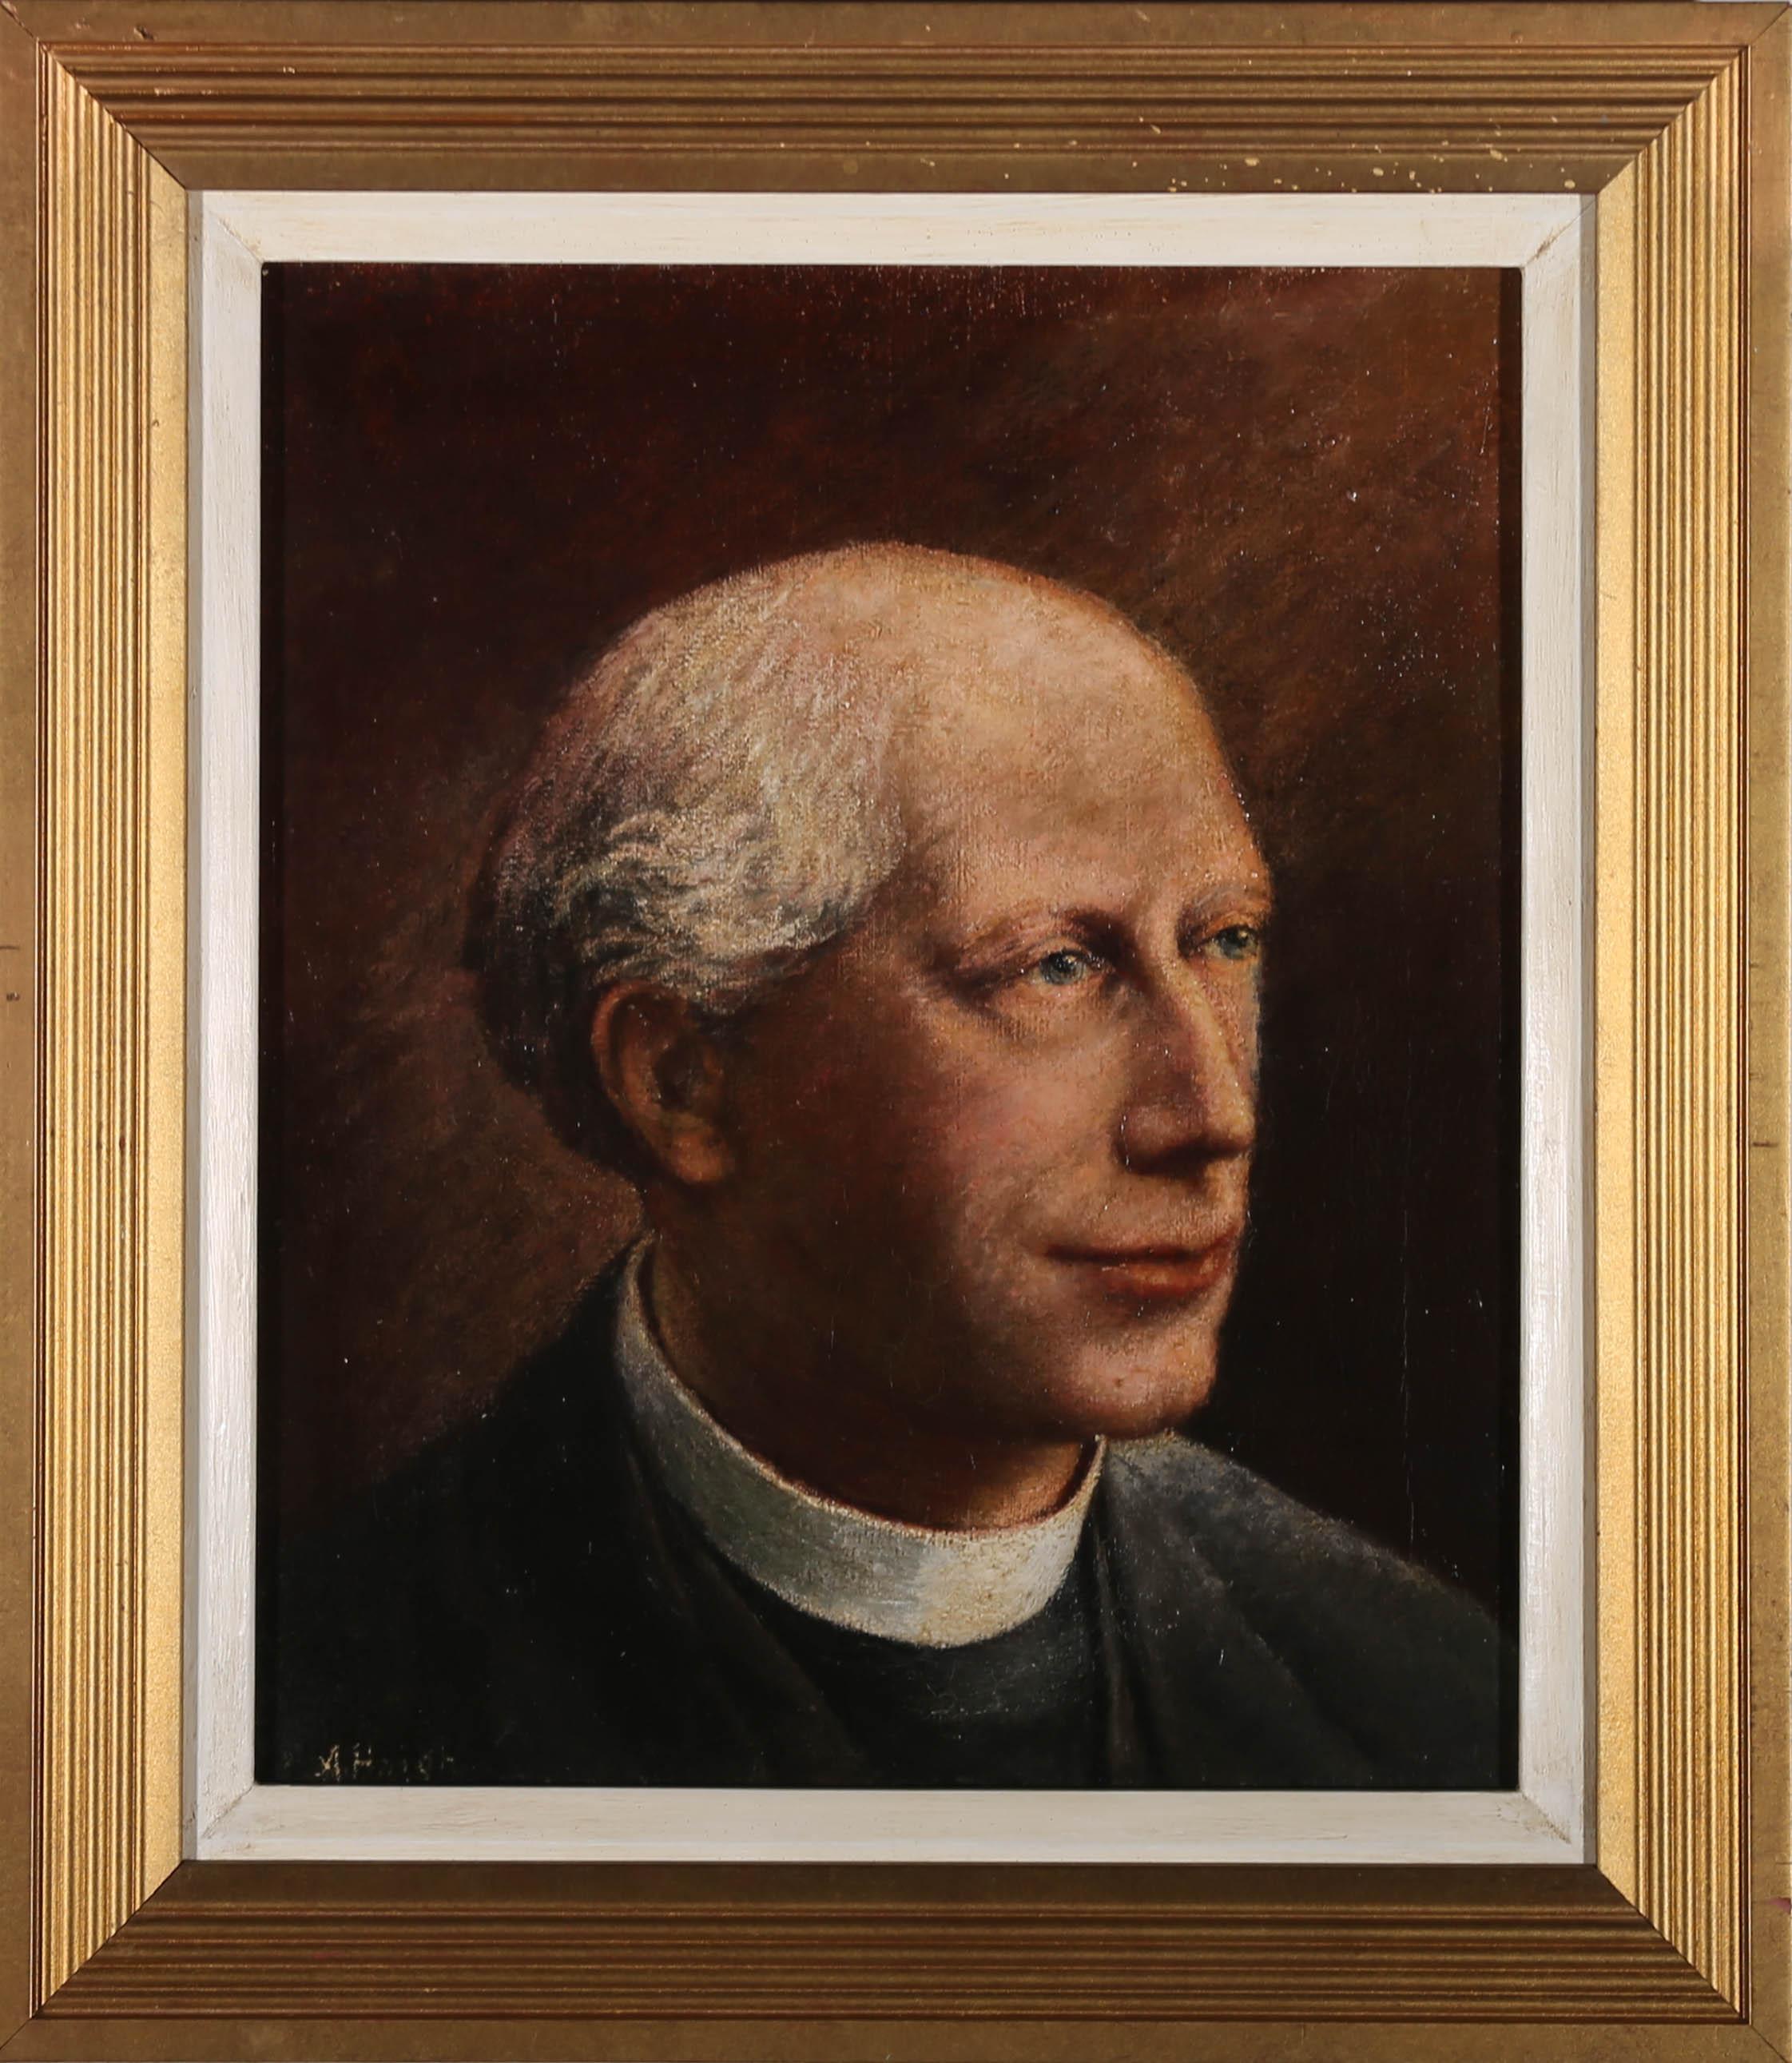 A soft and characterful portrait of a gently smiling priest with kindly eyes. The artist has signed to the lower left edge and the painting has been presented in a reeded gilt frame with white inner window. The canvas has been fully relined. On